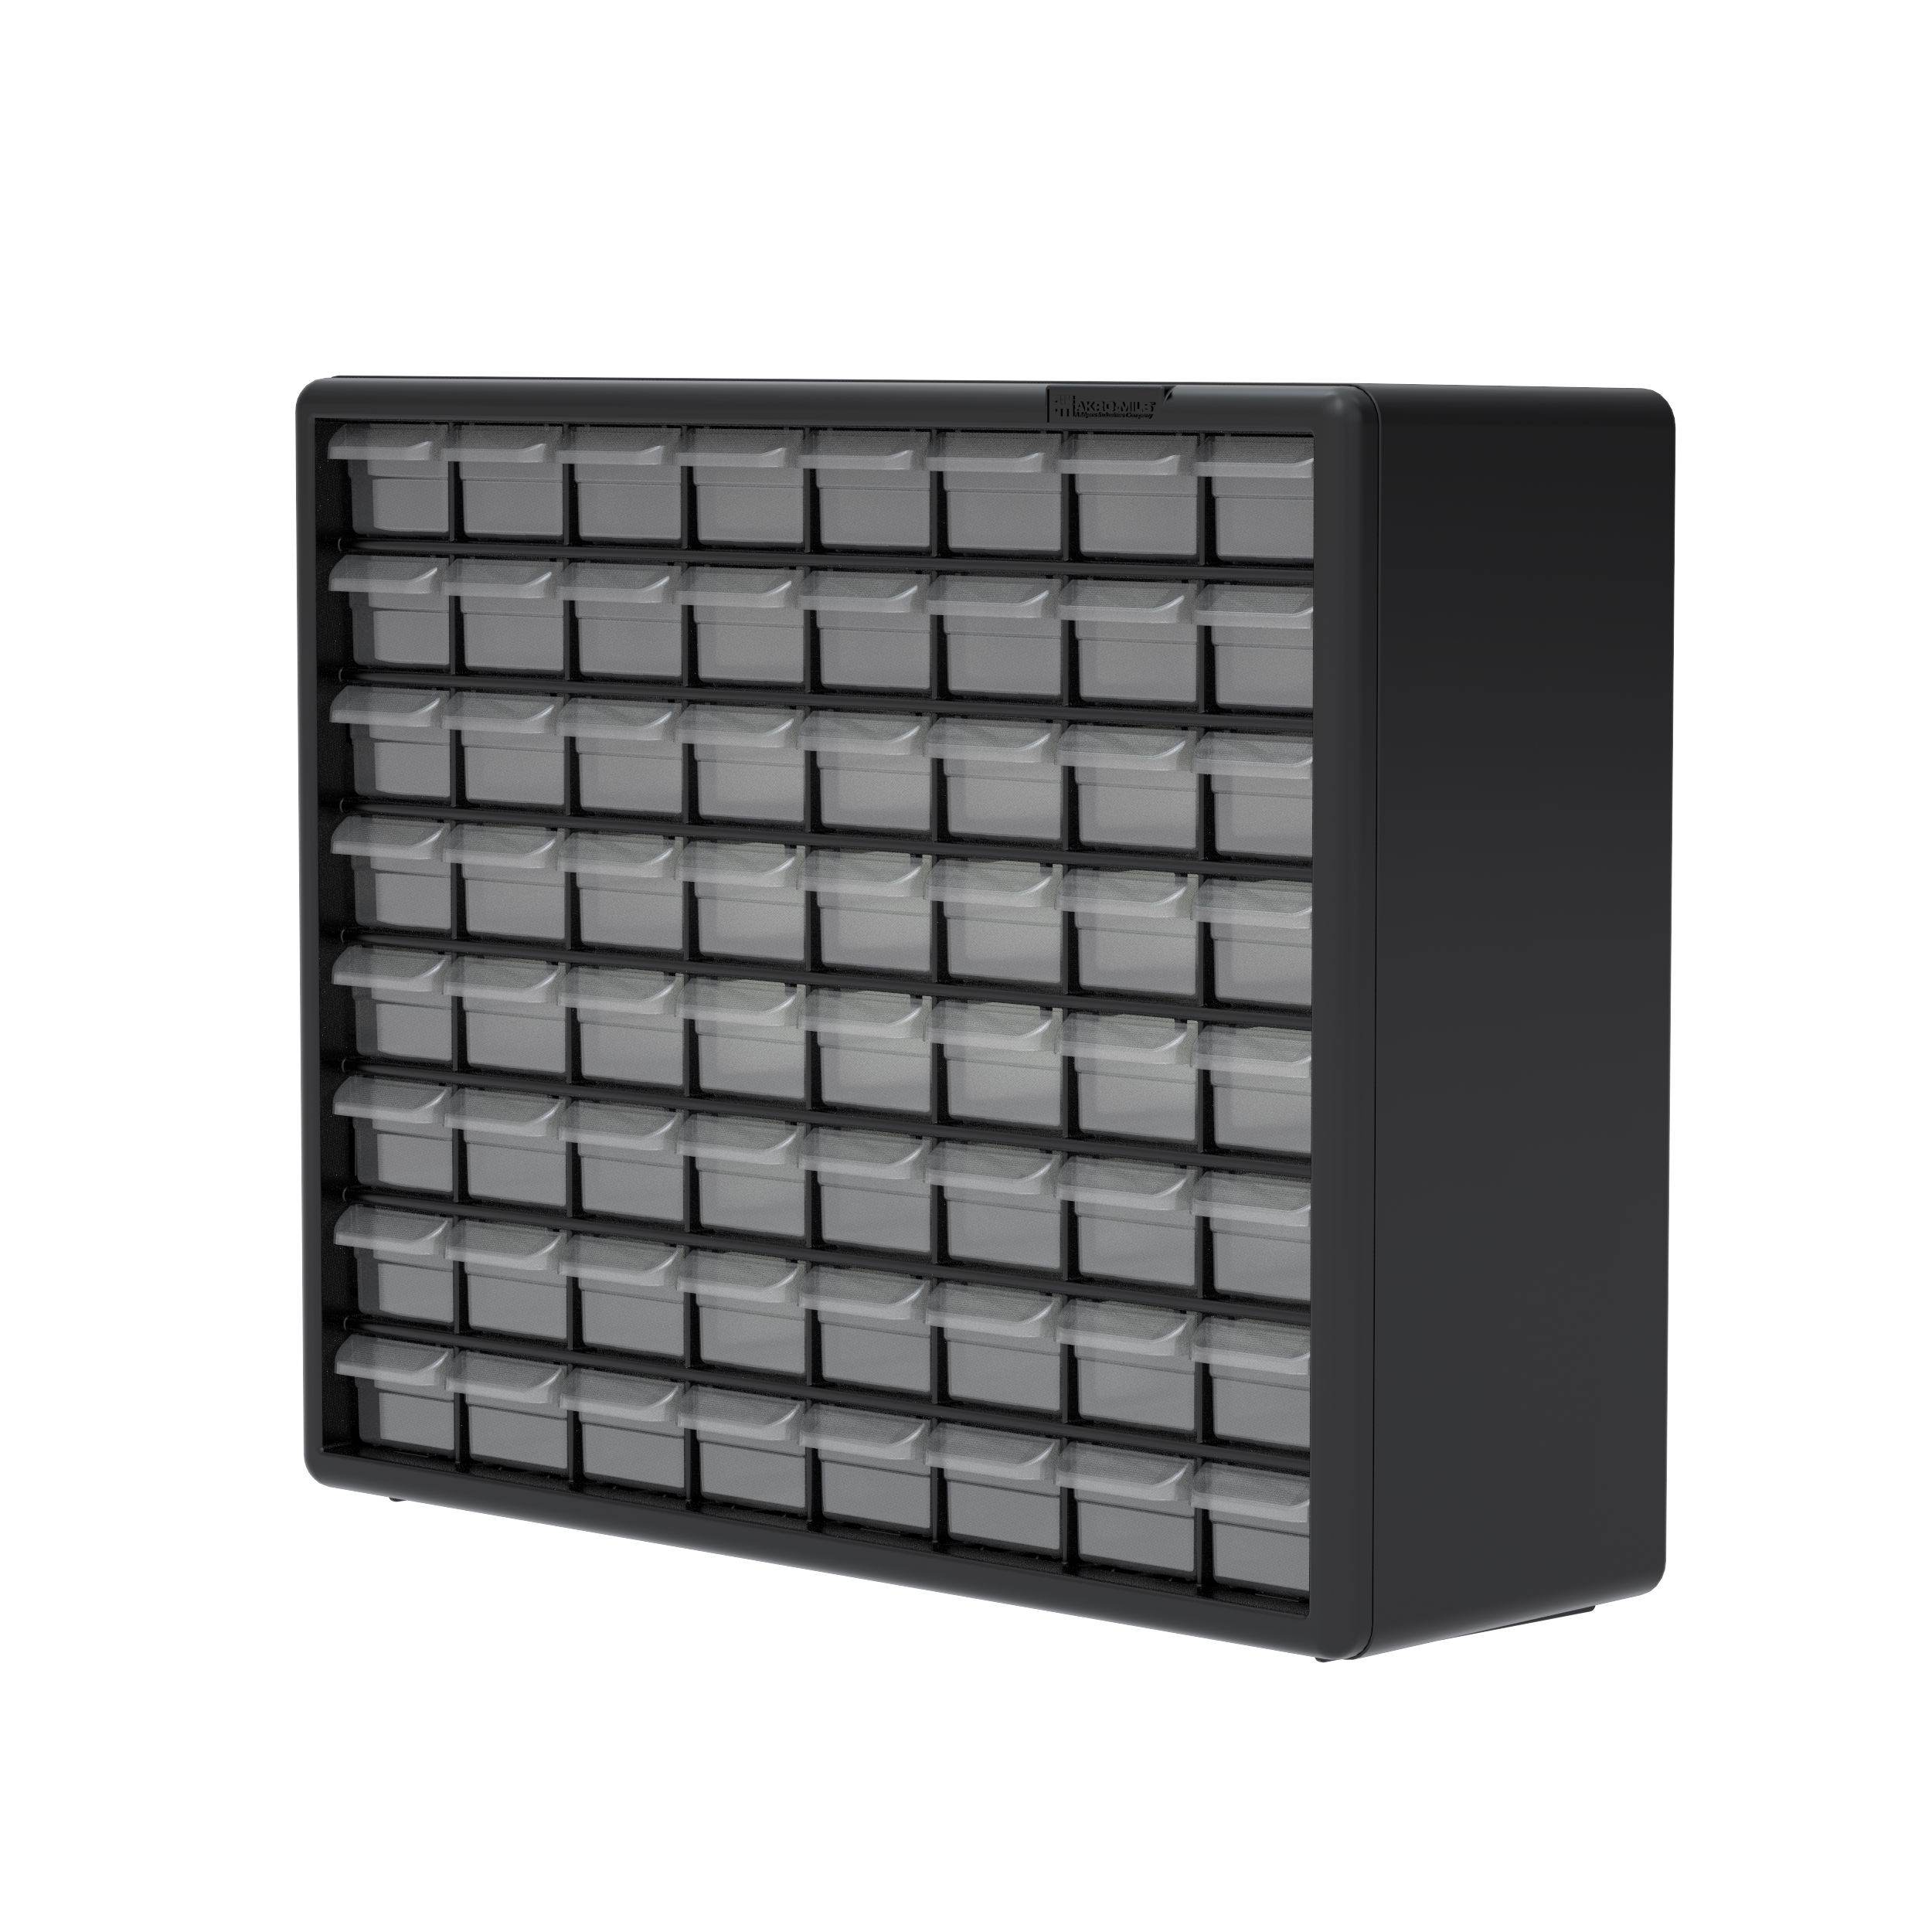 Akro-Mils 64 Drawer Plastic Storage Organizer with Drawers for Hardware,  Small Parts, Craft Supplies, Black 